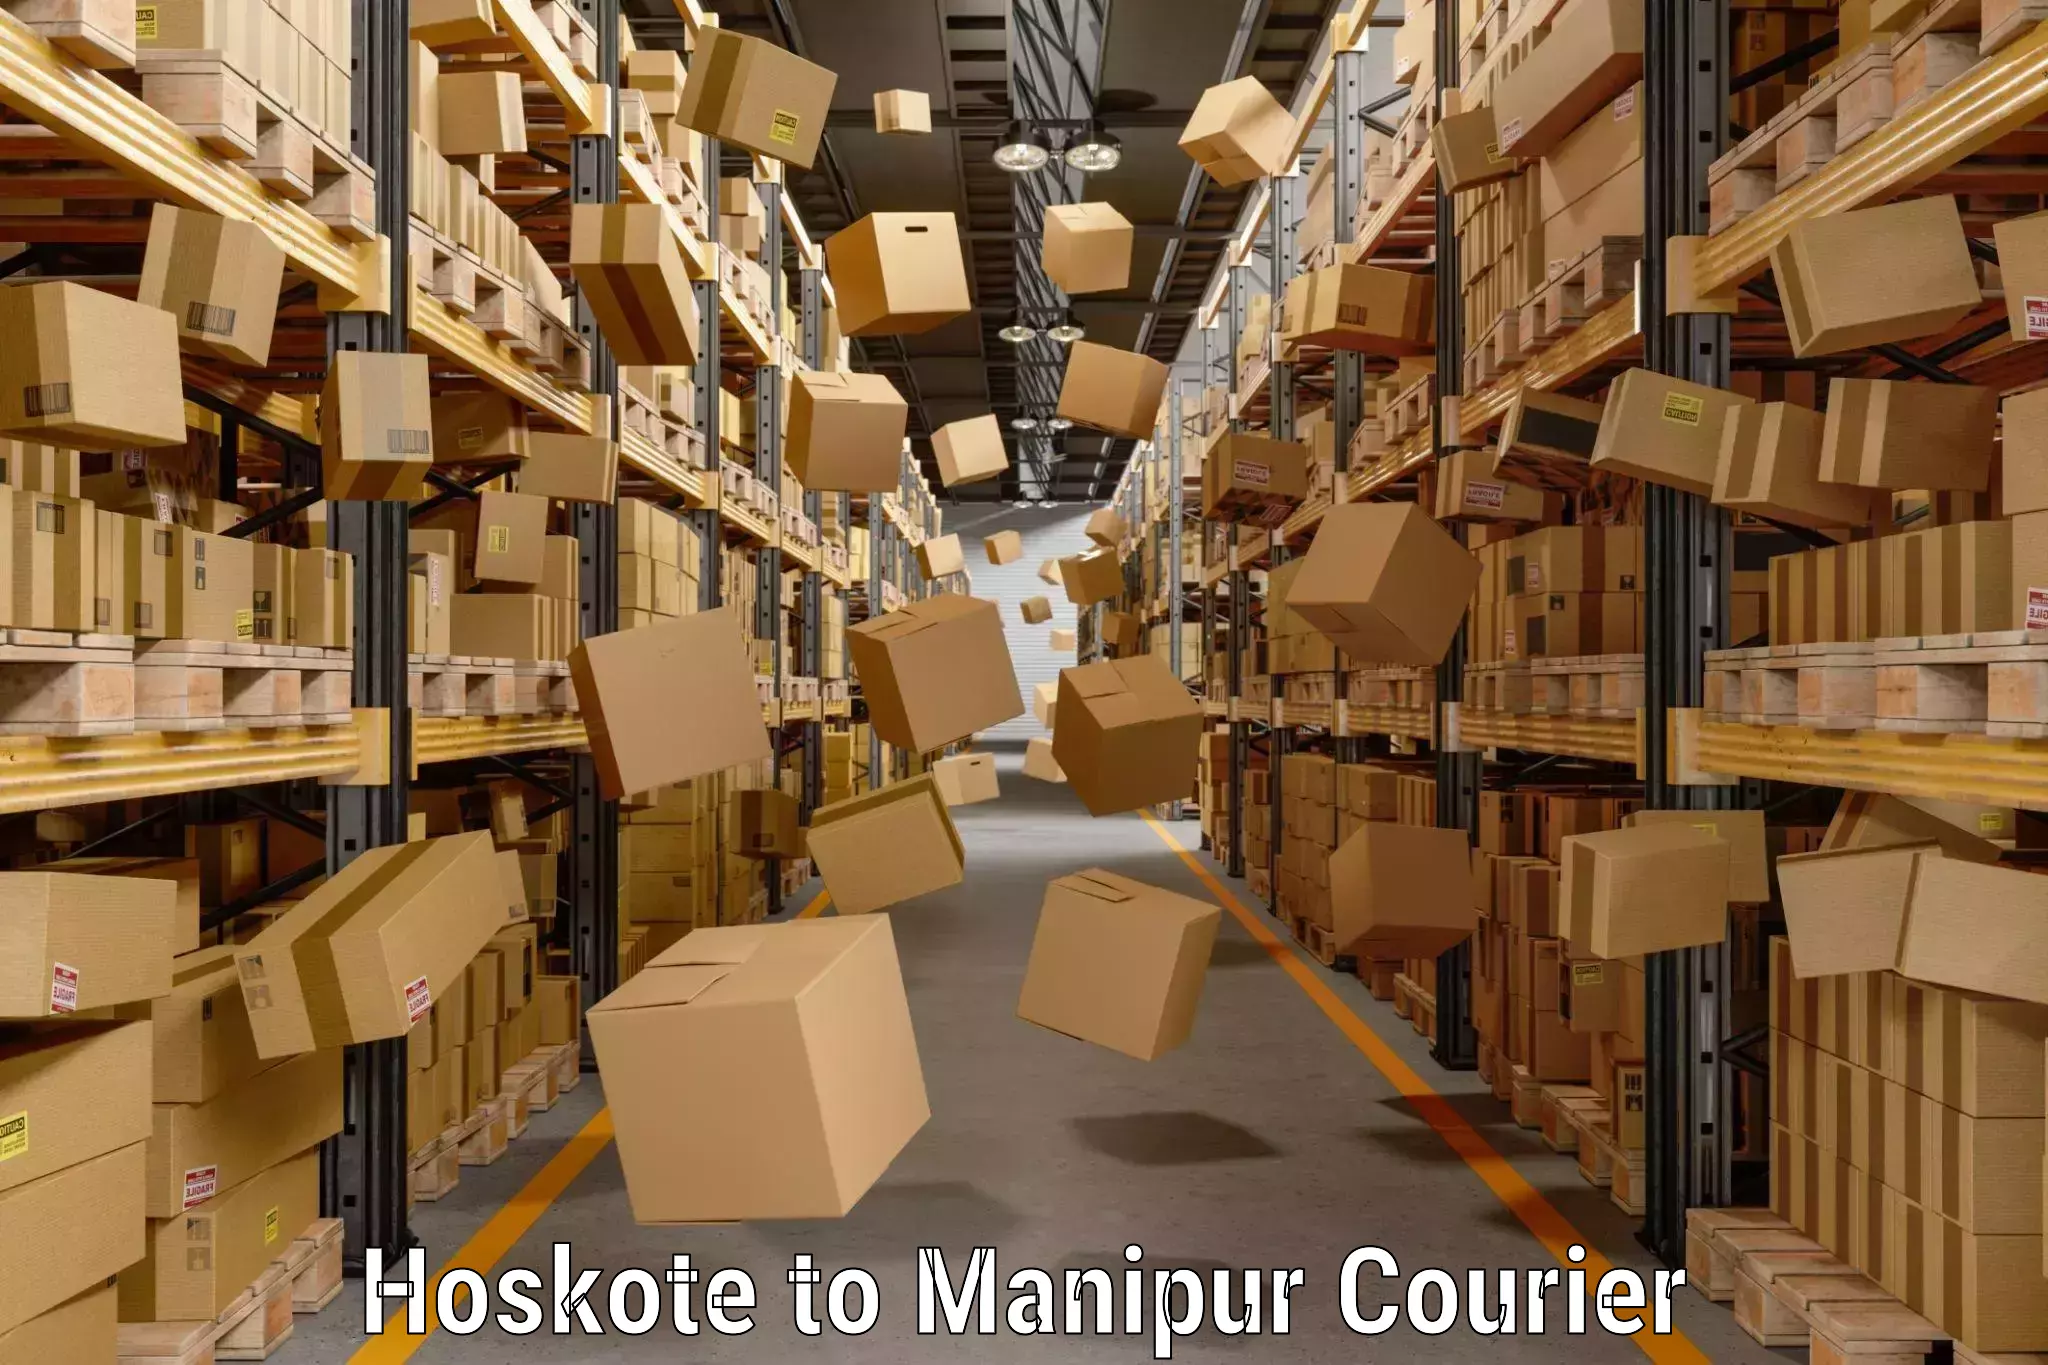 Luggage delivery network Hoskote to Manipur